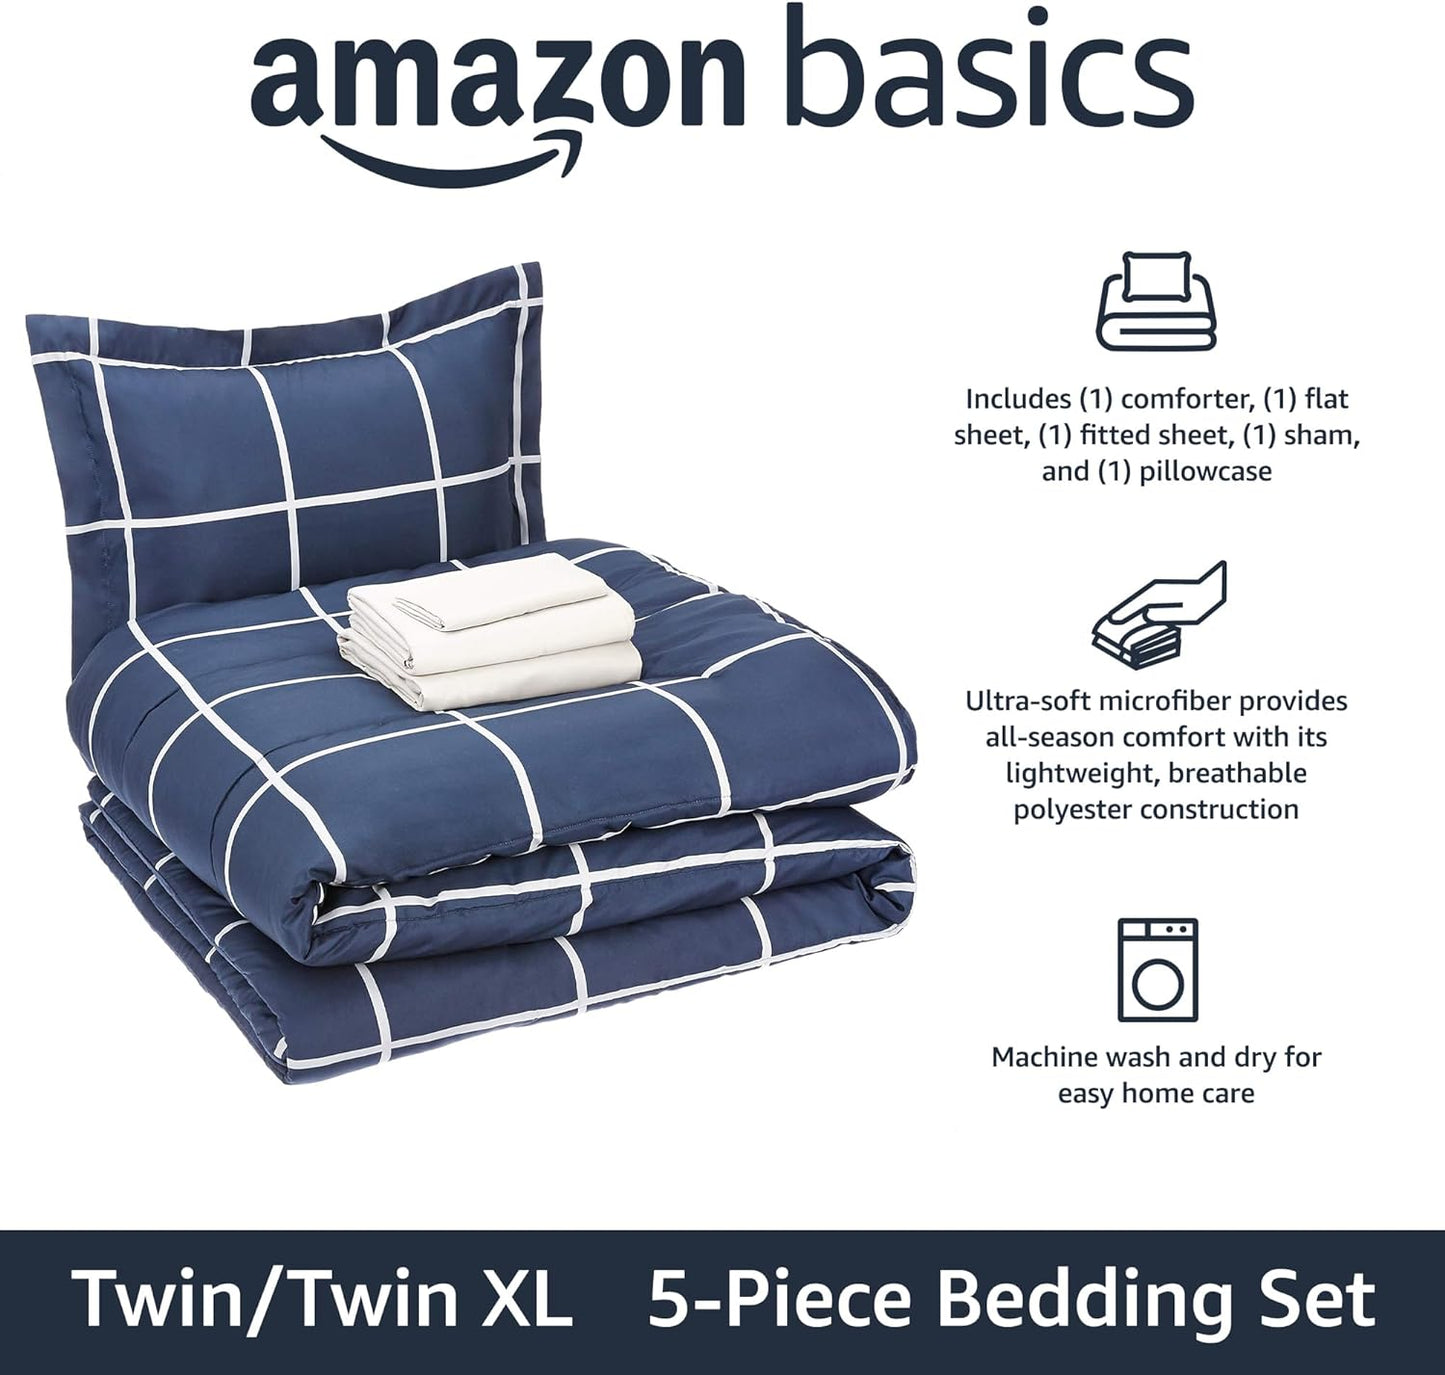 Lightweight Microfiber Bed-In-A-Bag Comforter 5-Piece Bedding Set, Twin/Twin XL, Navy with Simple Plaid